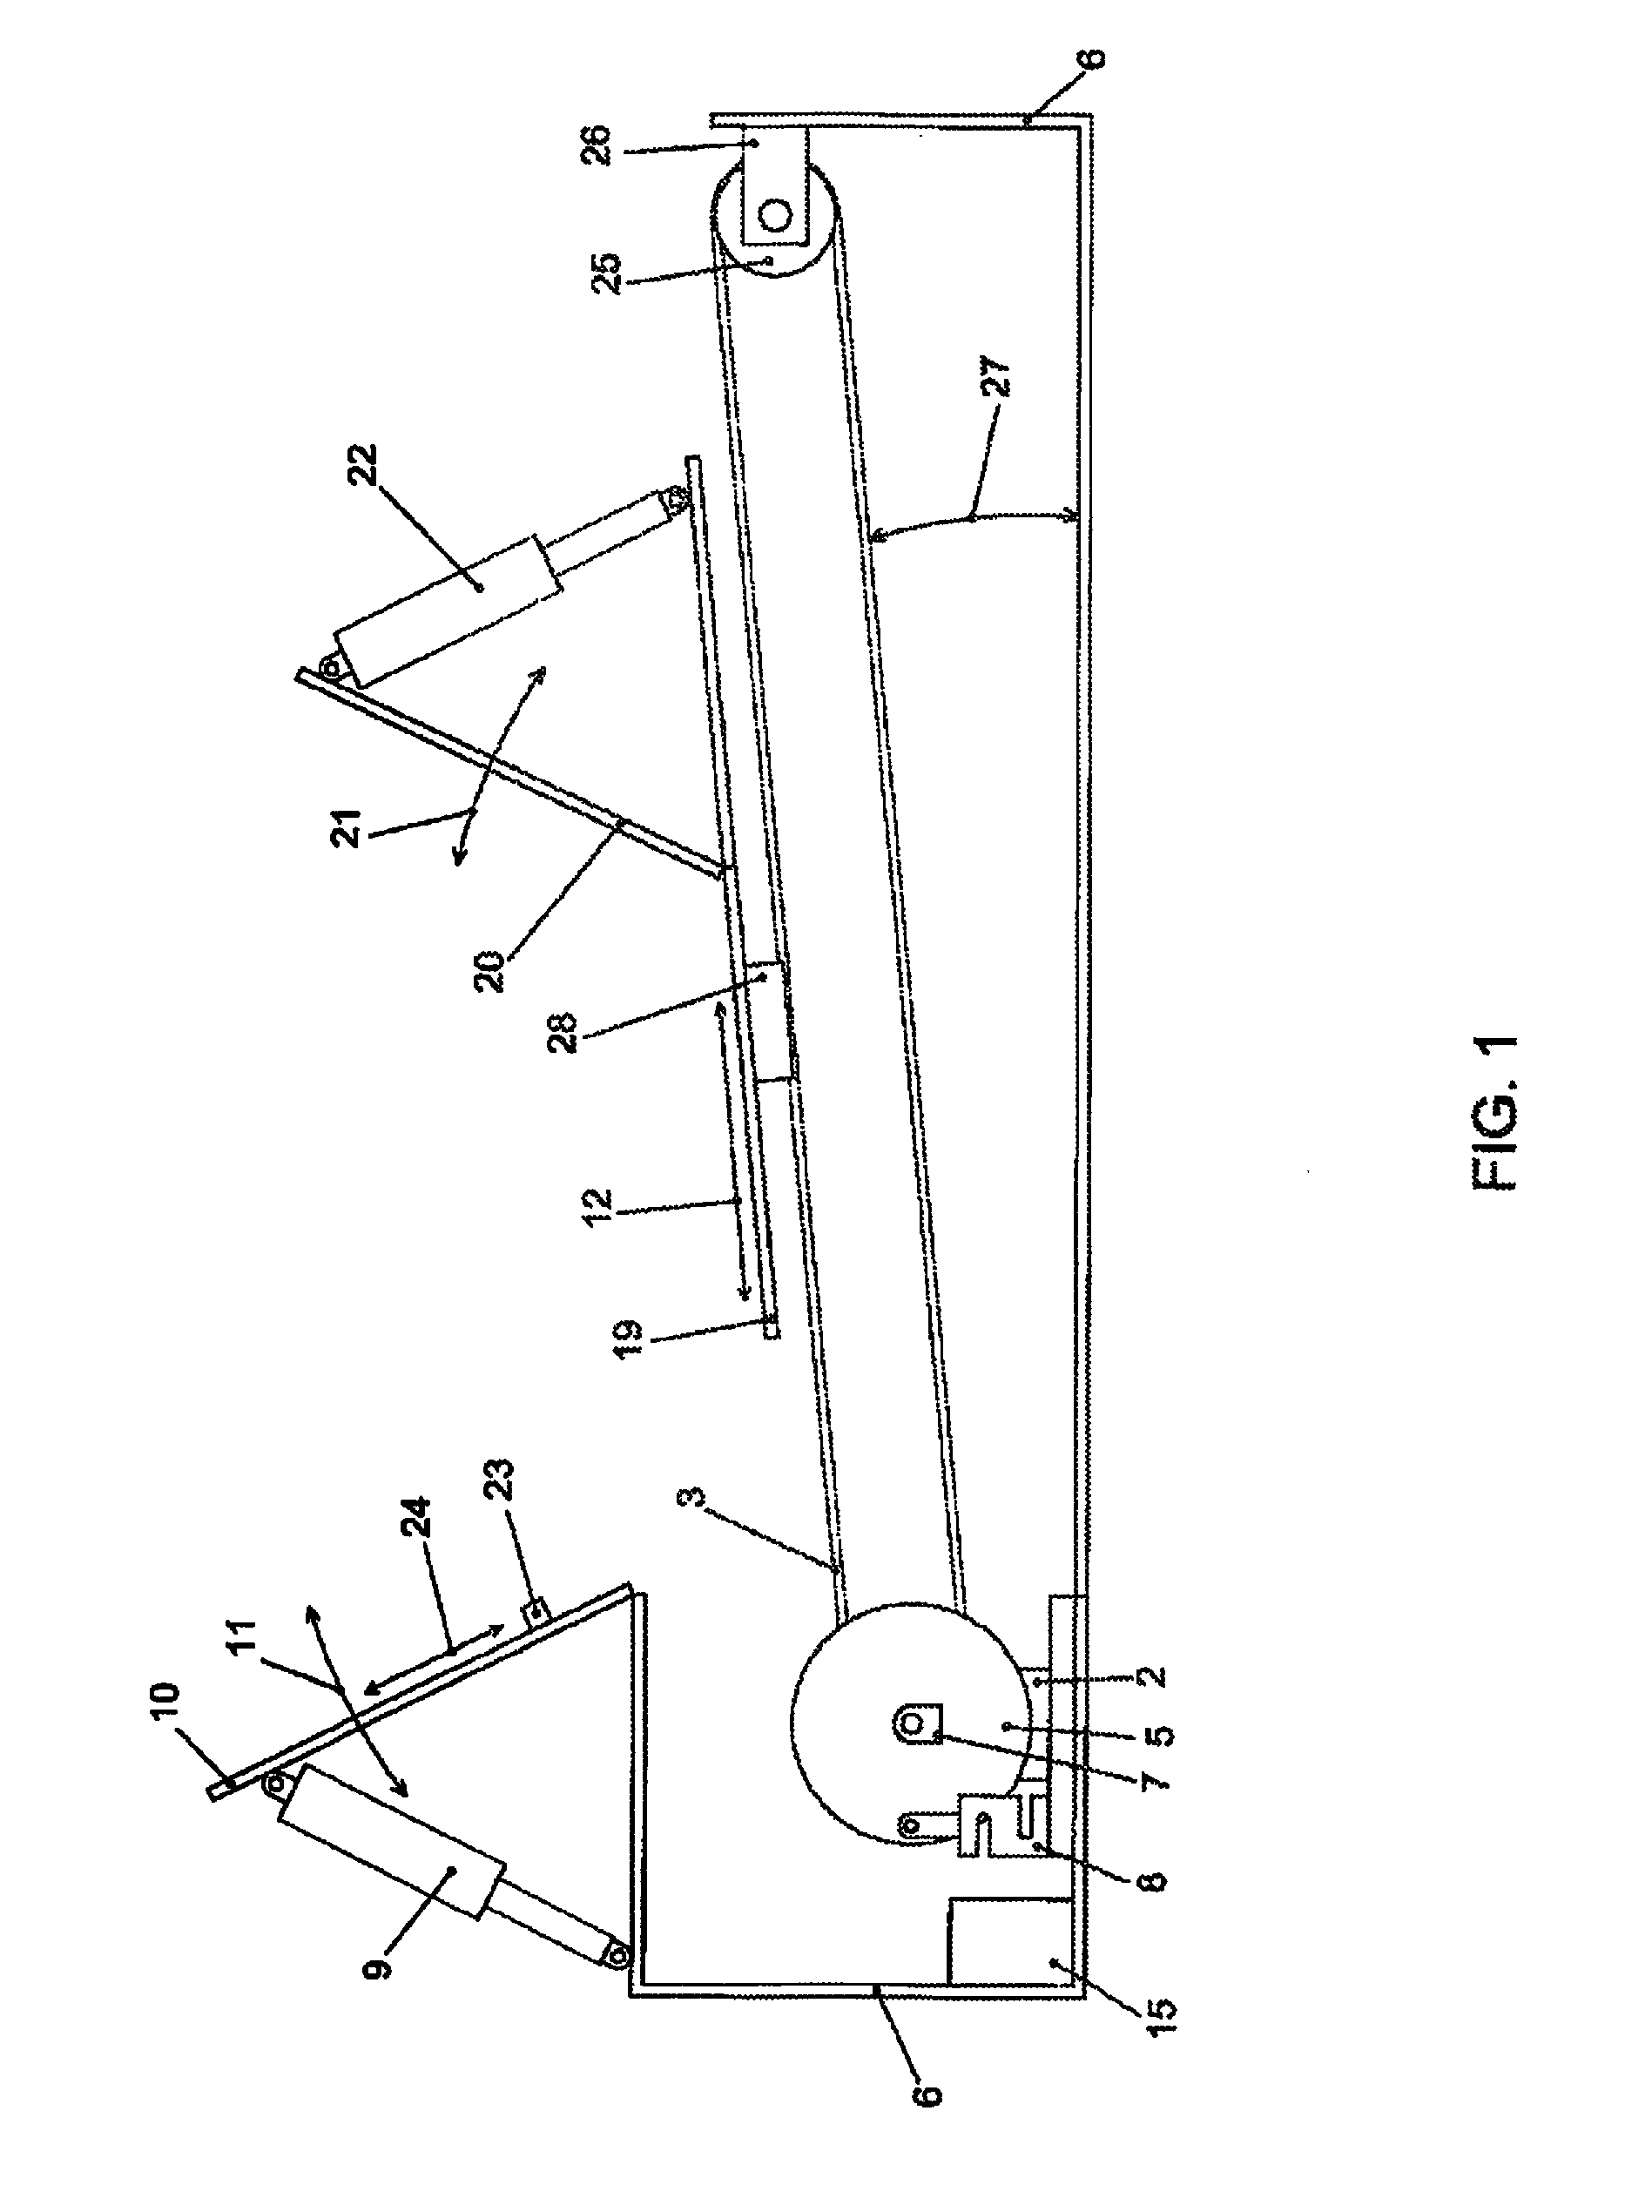 Method and apparatus for controlled rehabilitation and training of muscular system